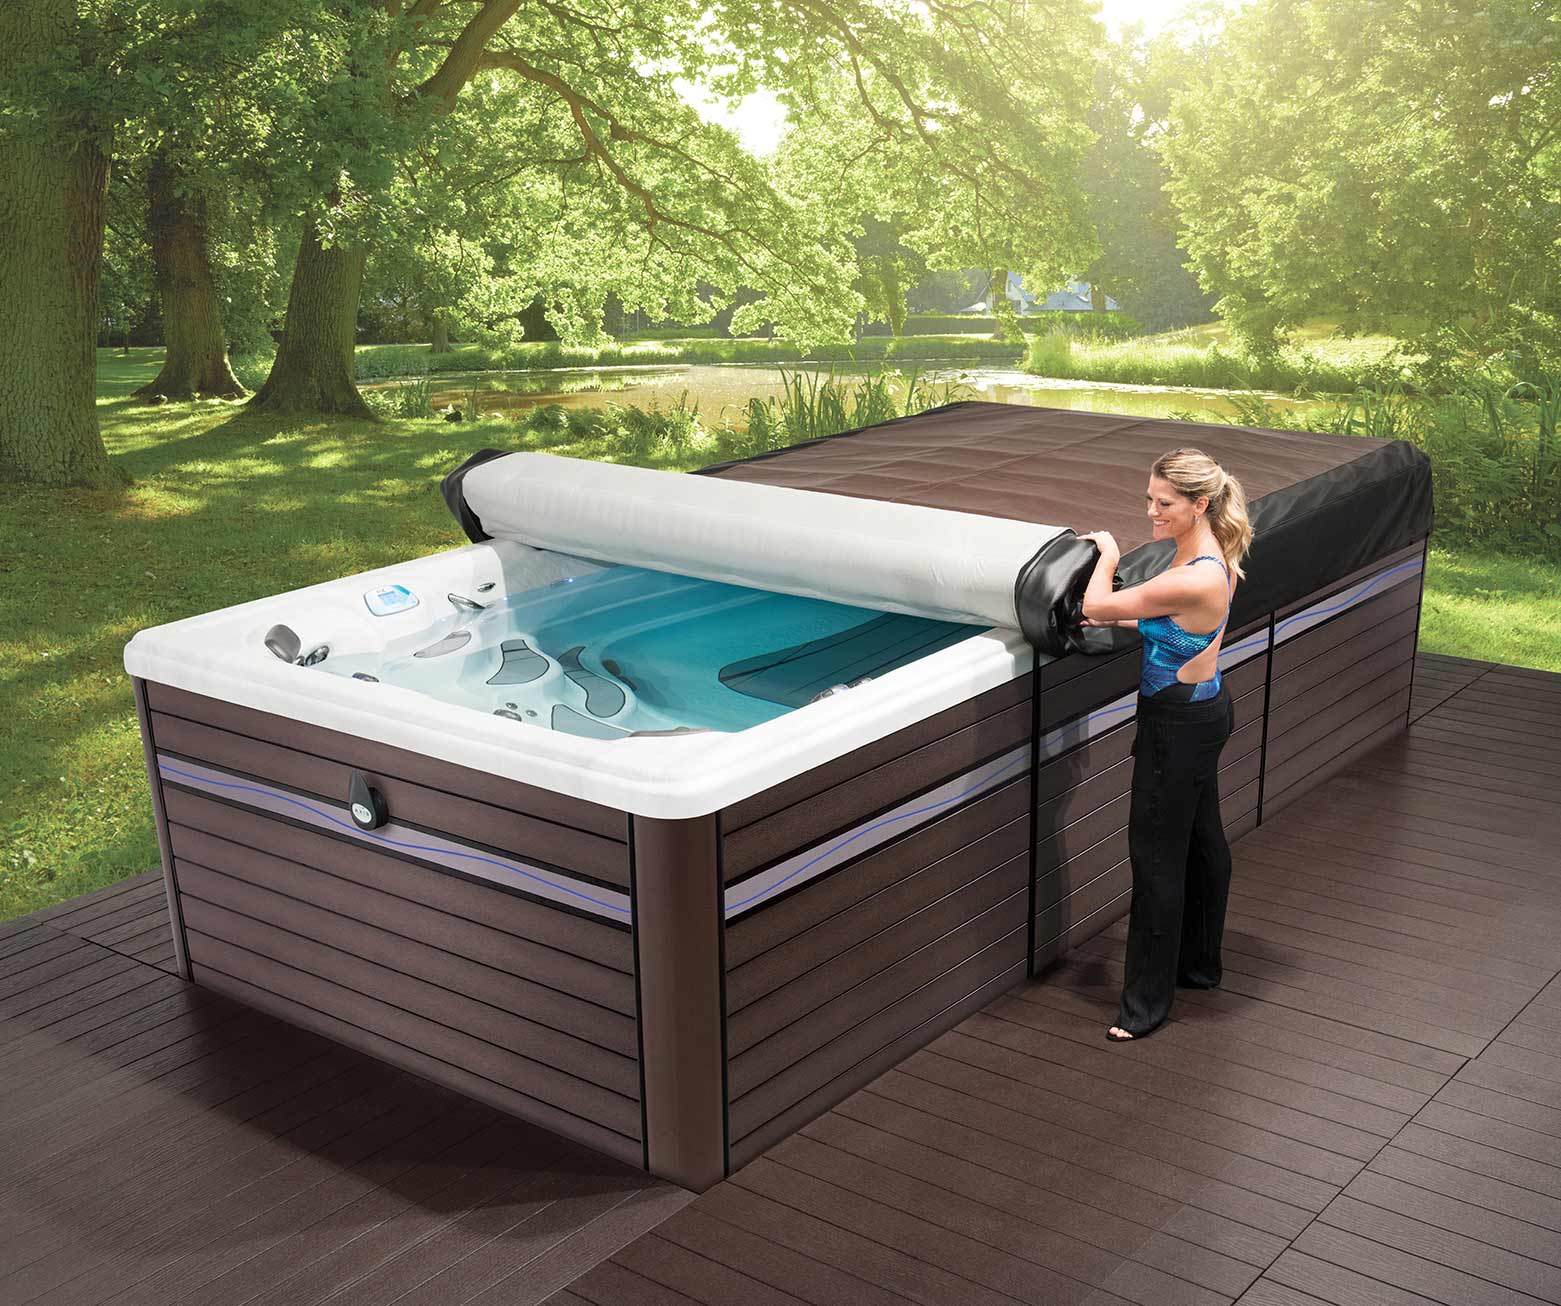 axis cover system easily unrolled on an h2x swim spa by master spas